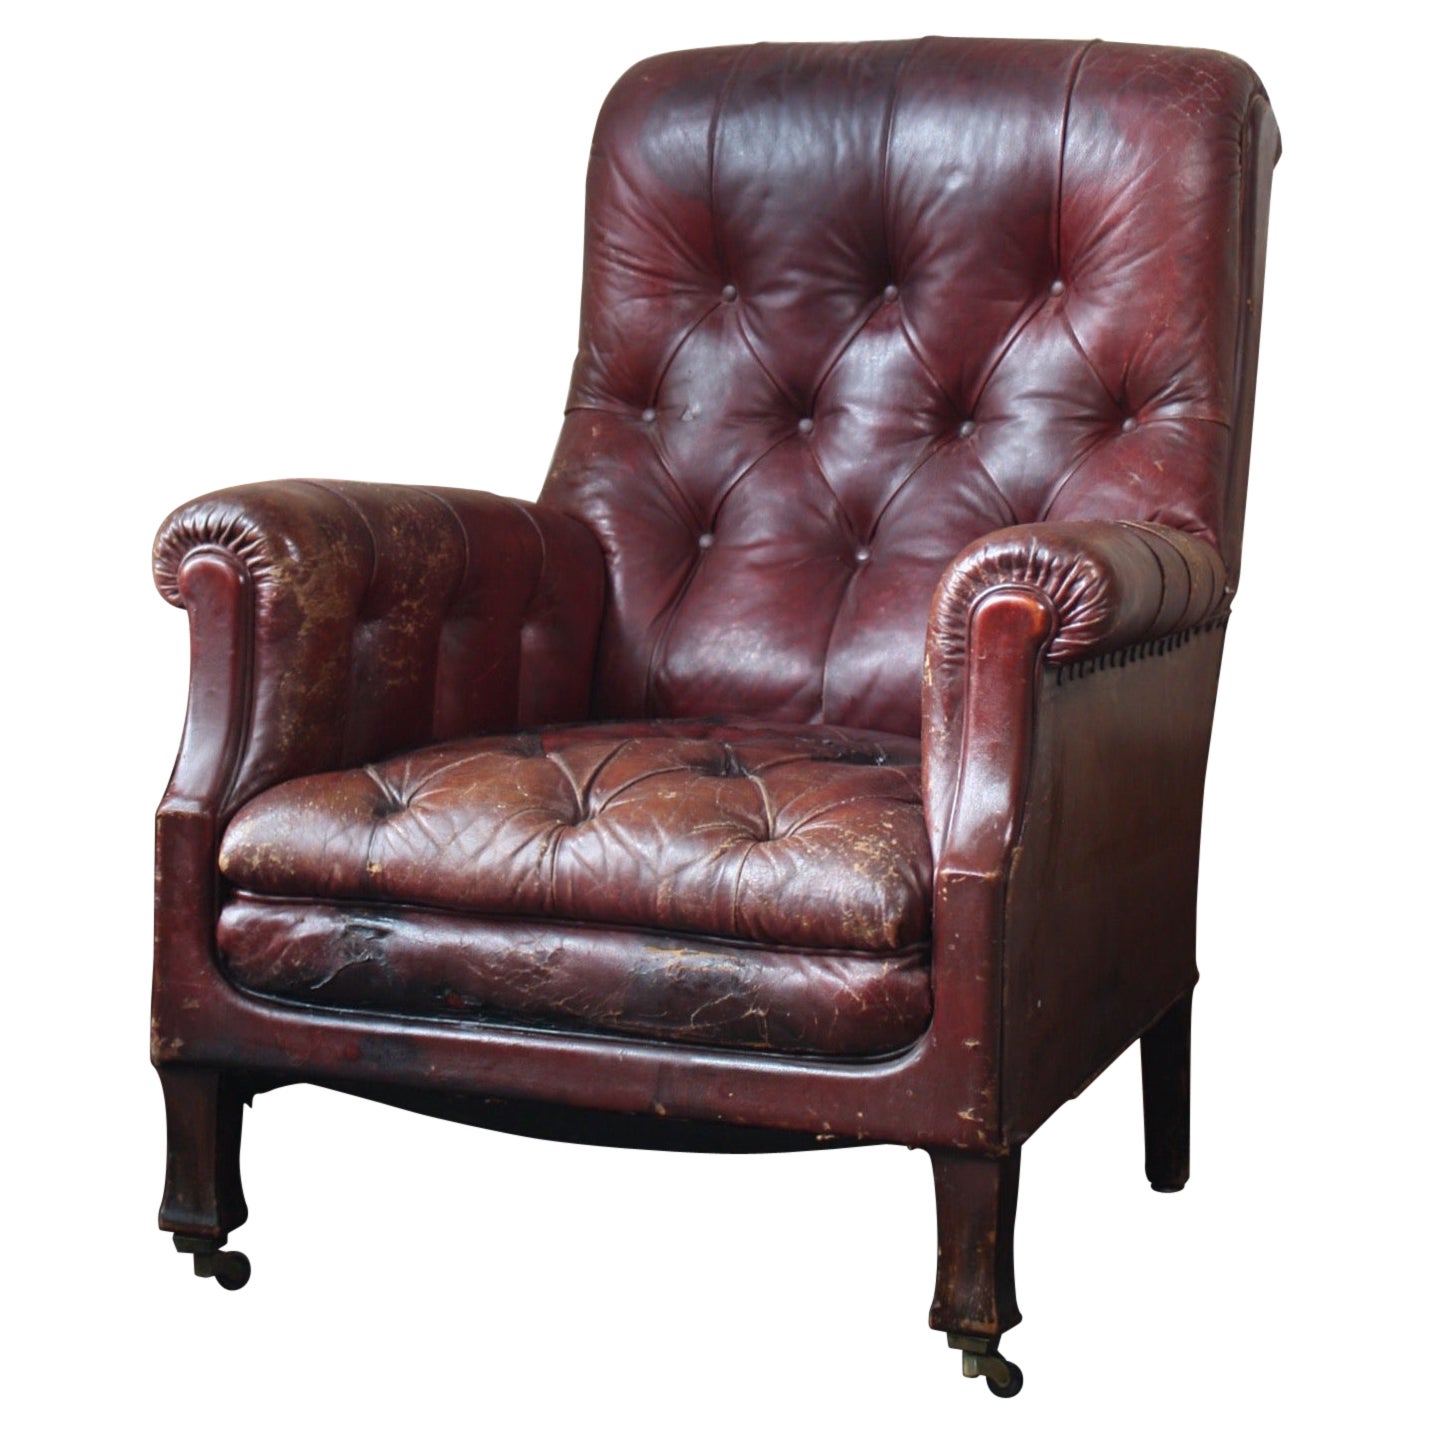 Early 20th C English Country House Style Red Maroon Leather Buttoned Armchair